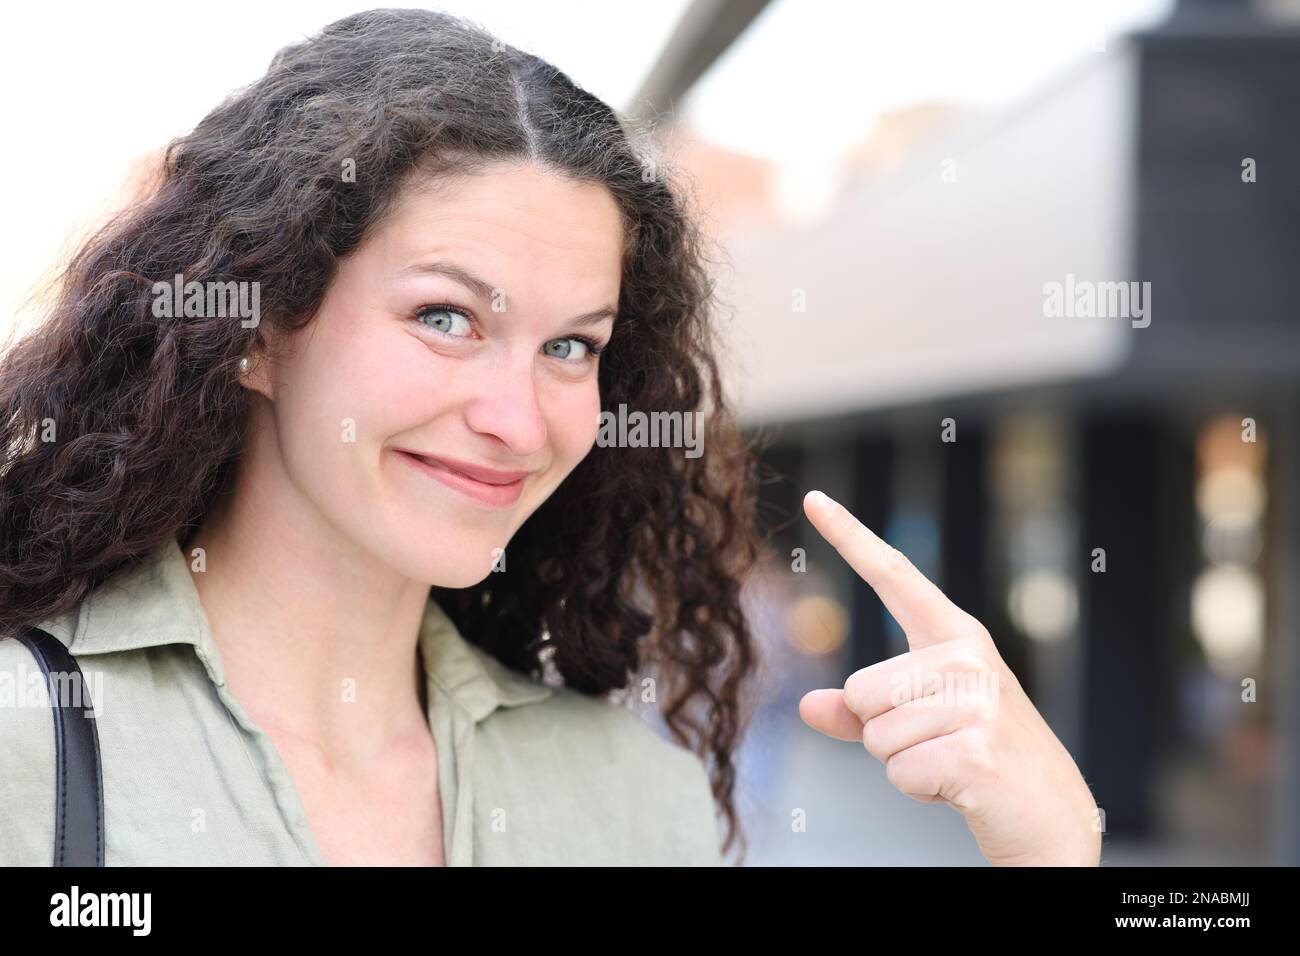 Woman pointing herself in the street Stock Photo